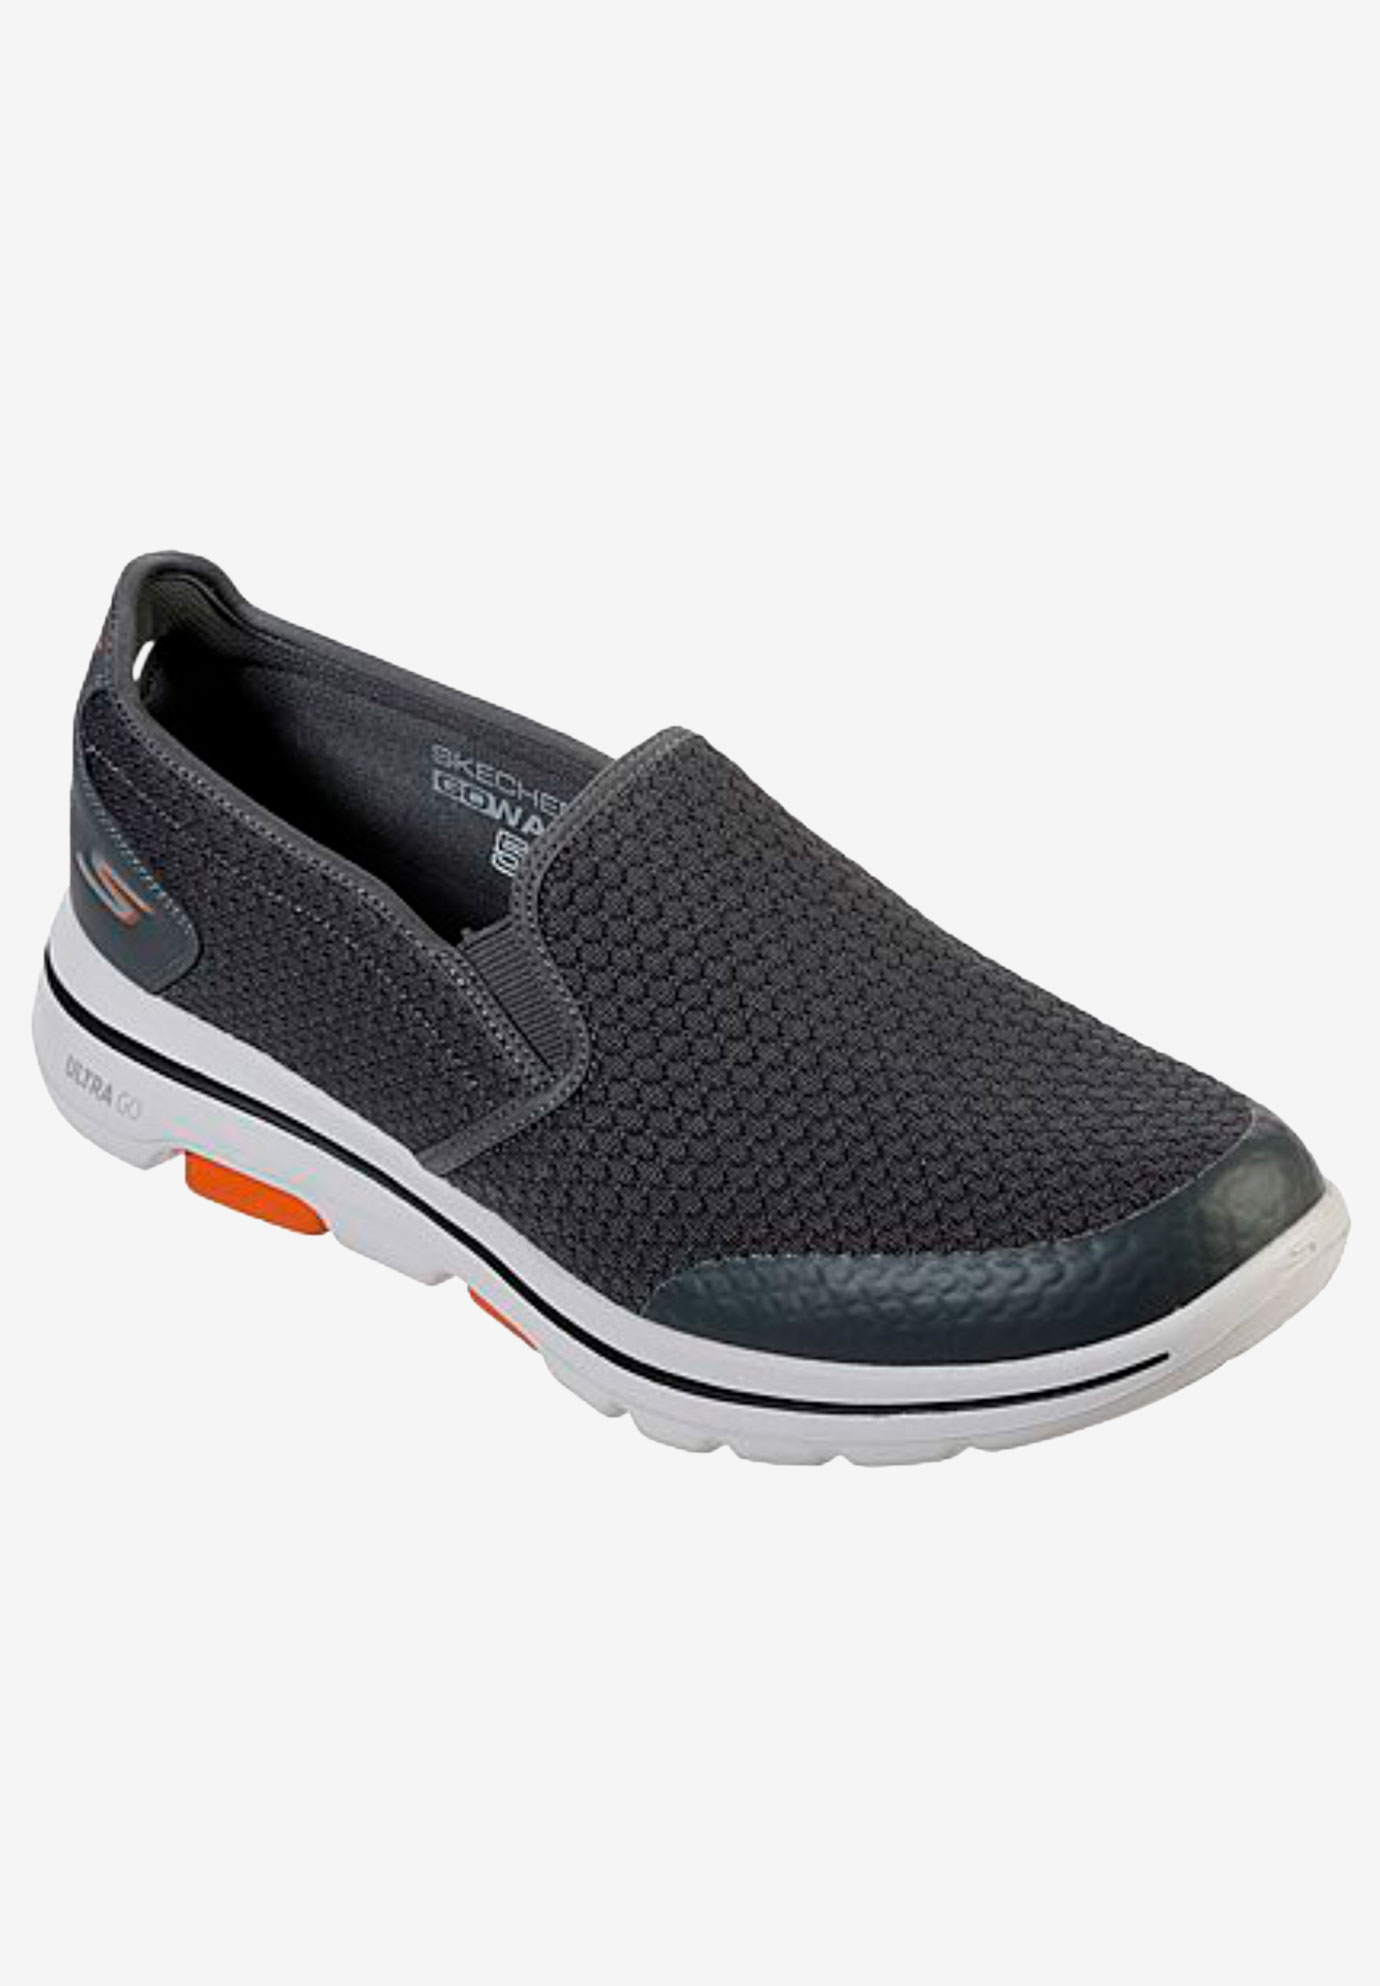 Skechers® Go-Walk™ Mesh Shoes| Big and Tall Athletic Shoes | King Size